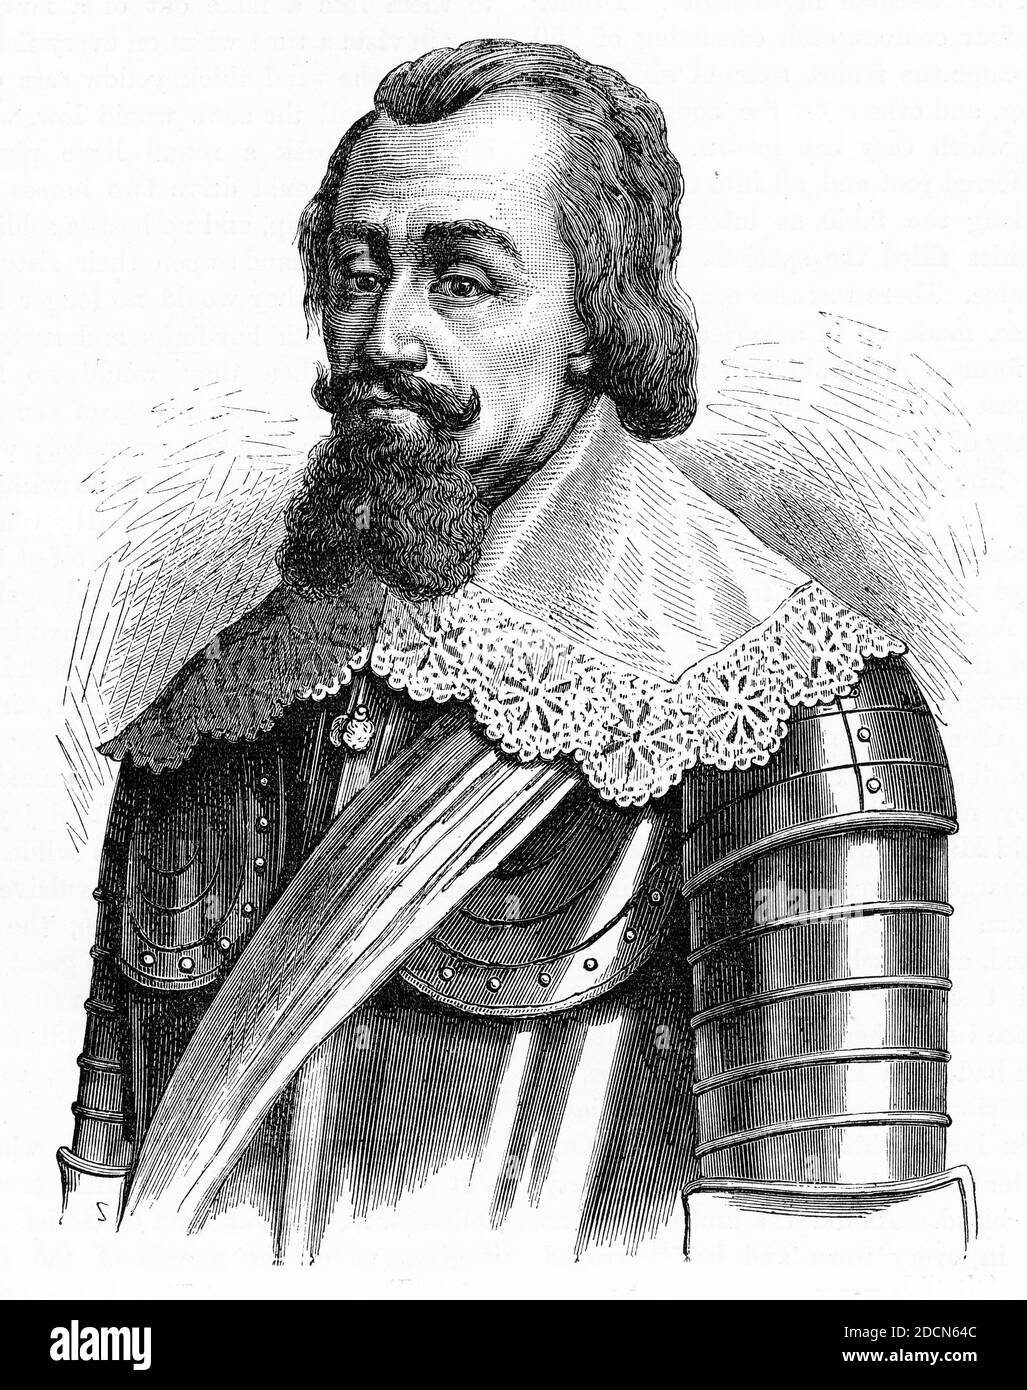 Engraved portrait of Axel Gustafsson Oxenstierna af Södermöre (1583–1654), Count of Södermöre, a Swedish statesman. who became a member of the Swedish Privy Council in 1609 and served as Lord High Chancellor of Sweden from 1612 until his death. Stock Photo